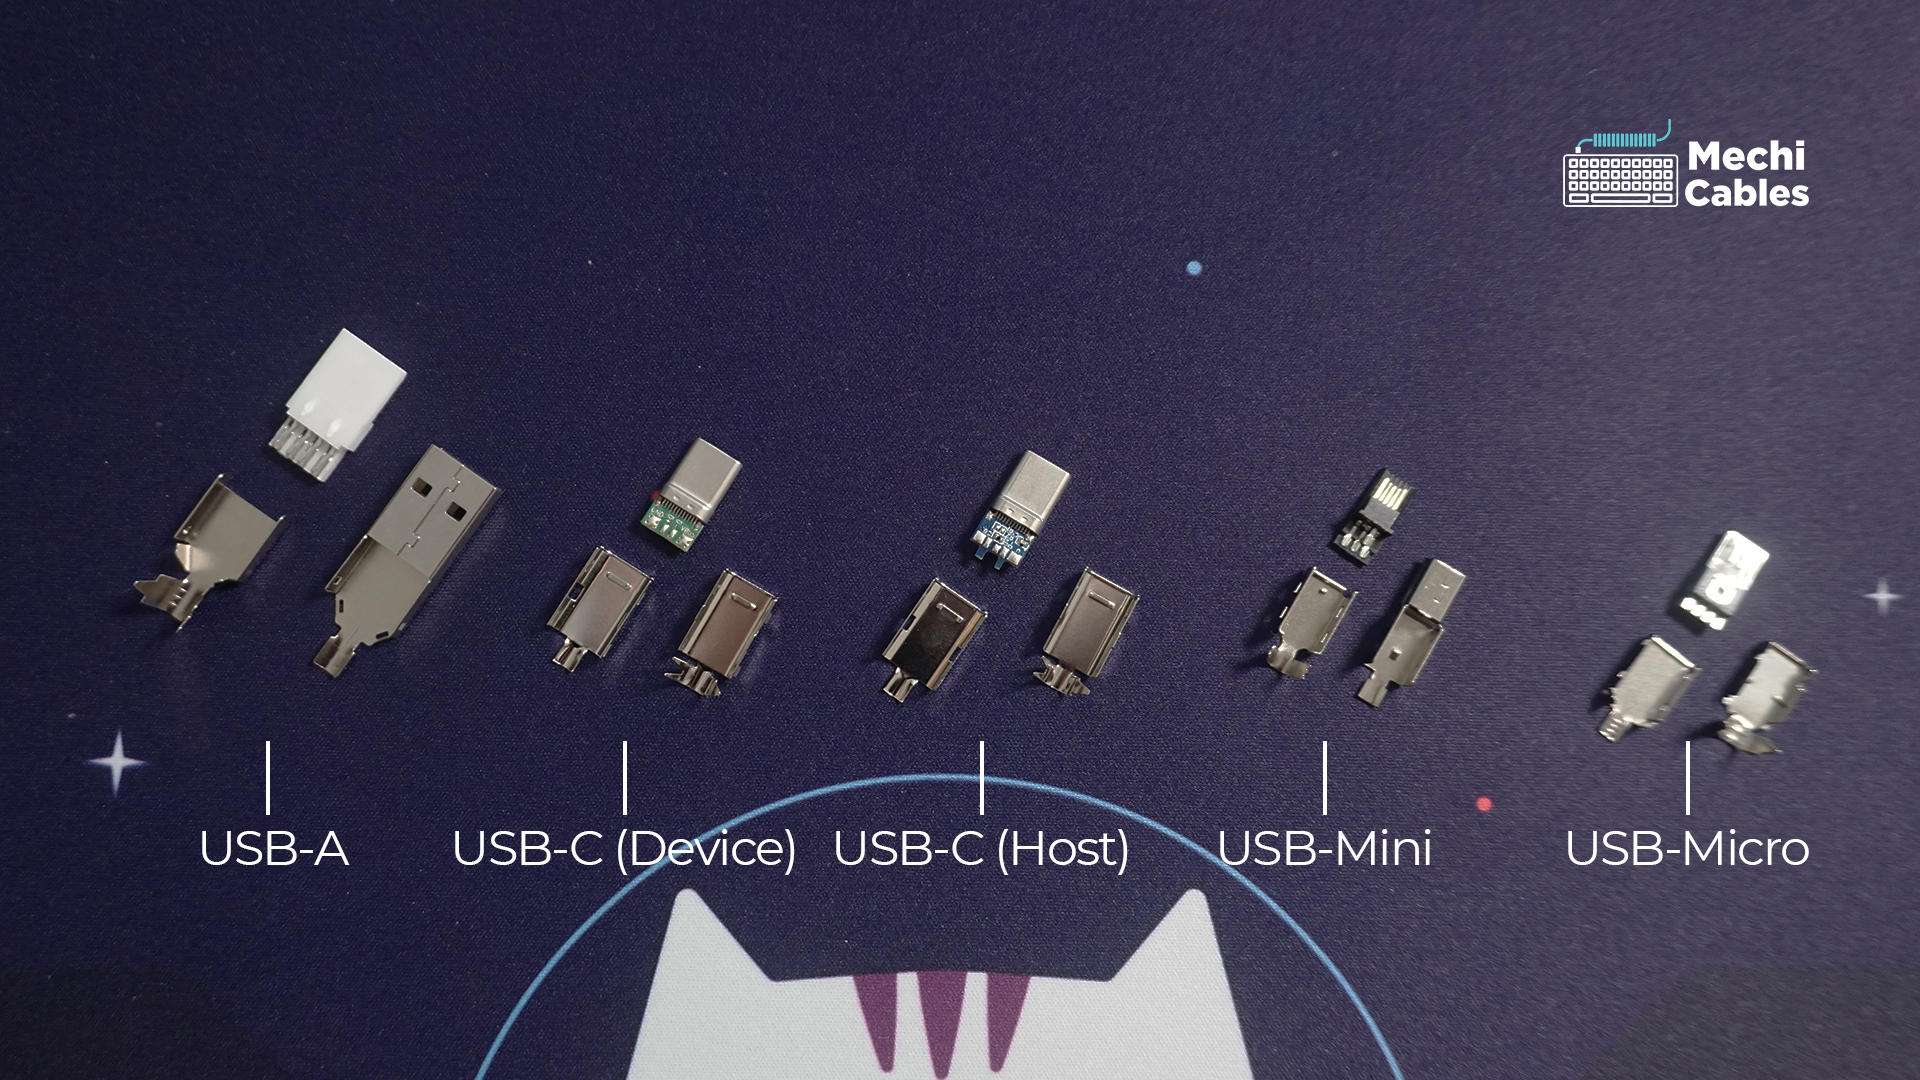 Five different USB options displayed on a purple mat